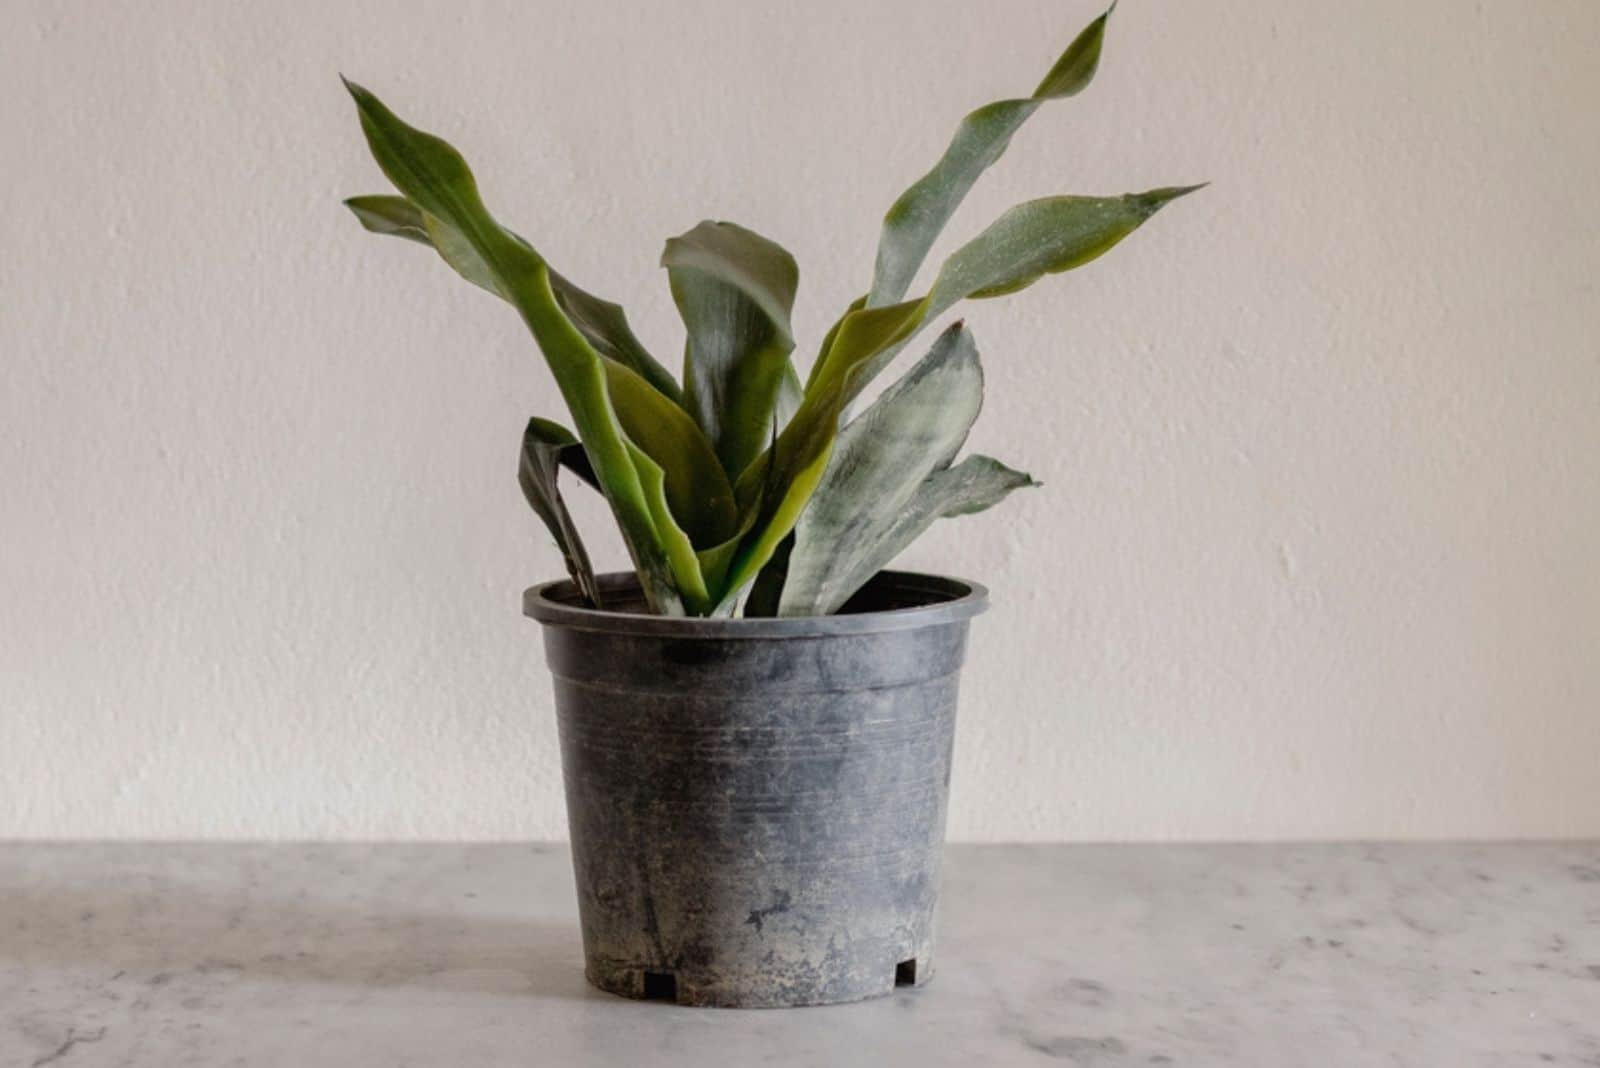 snake plant dying in a black pot